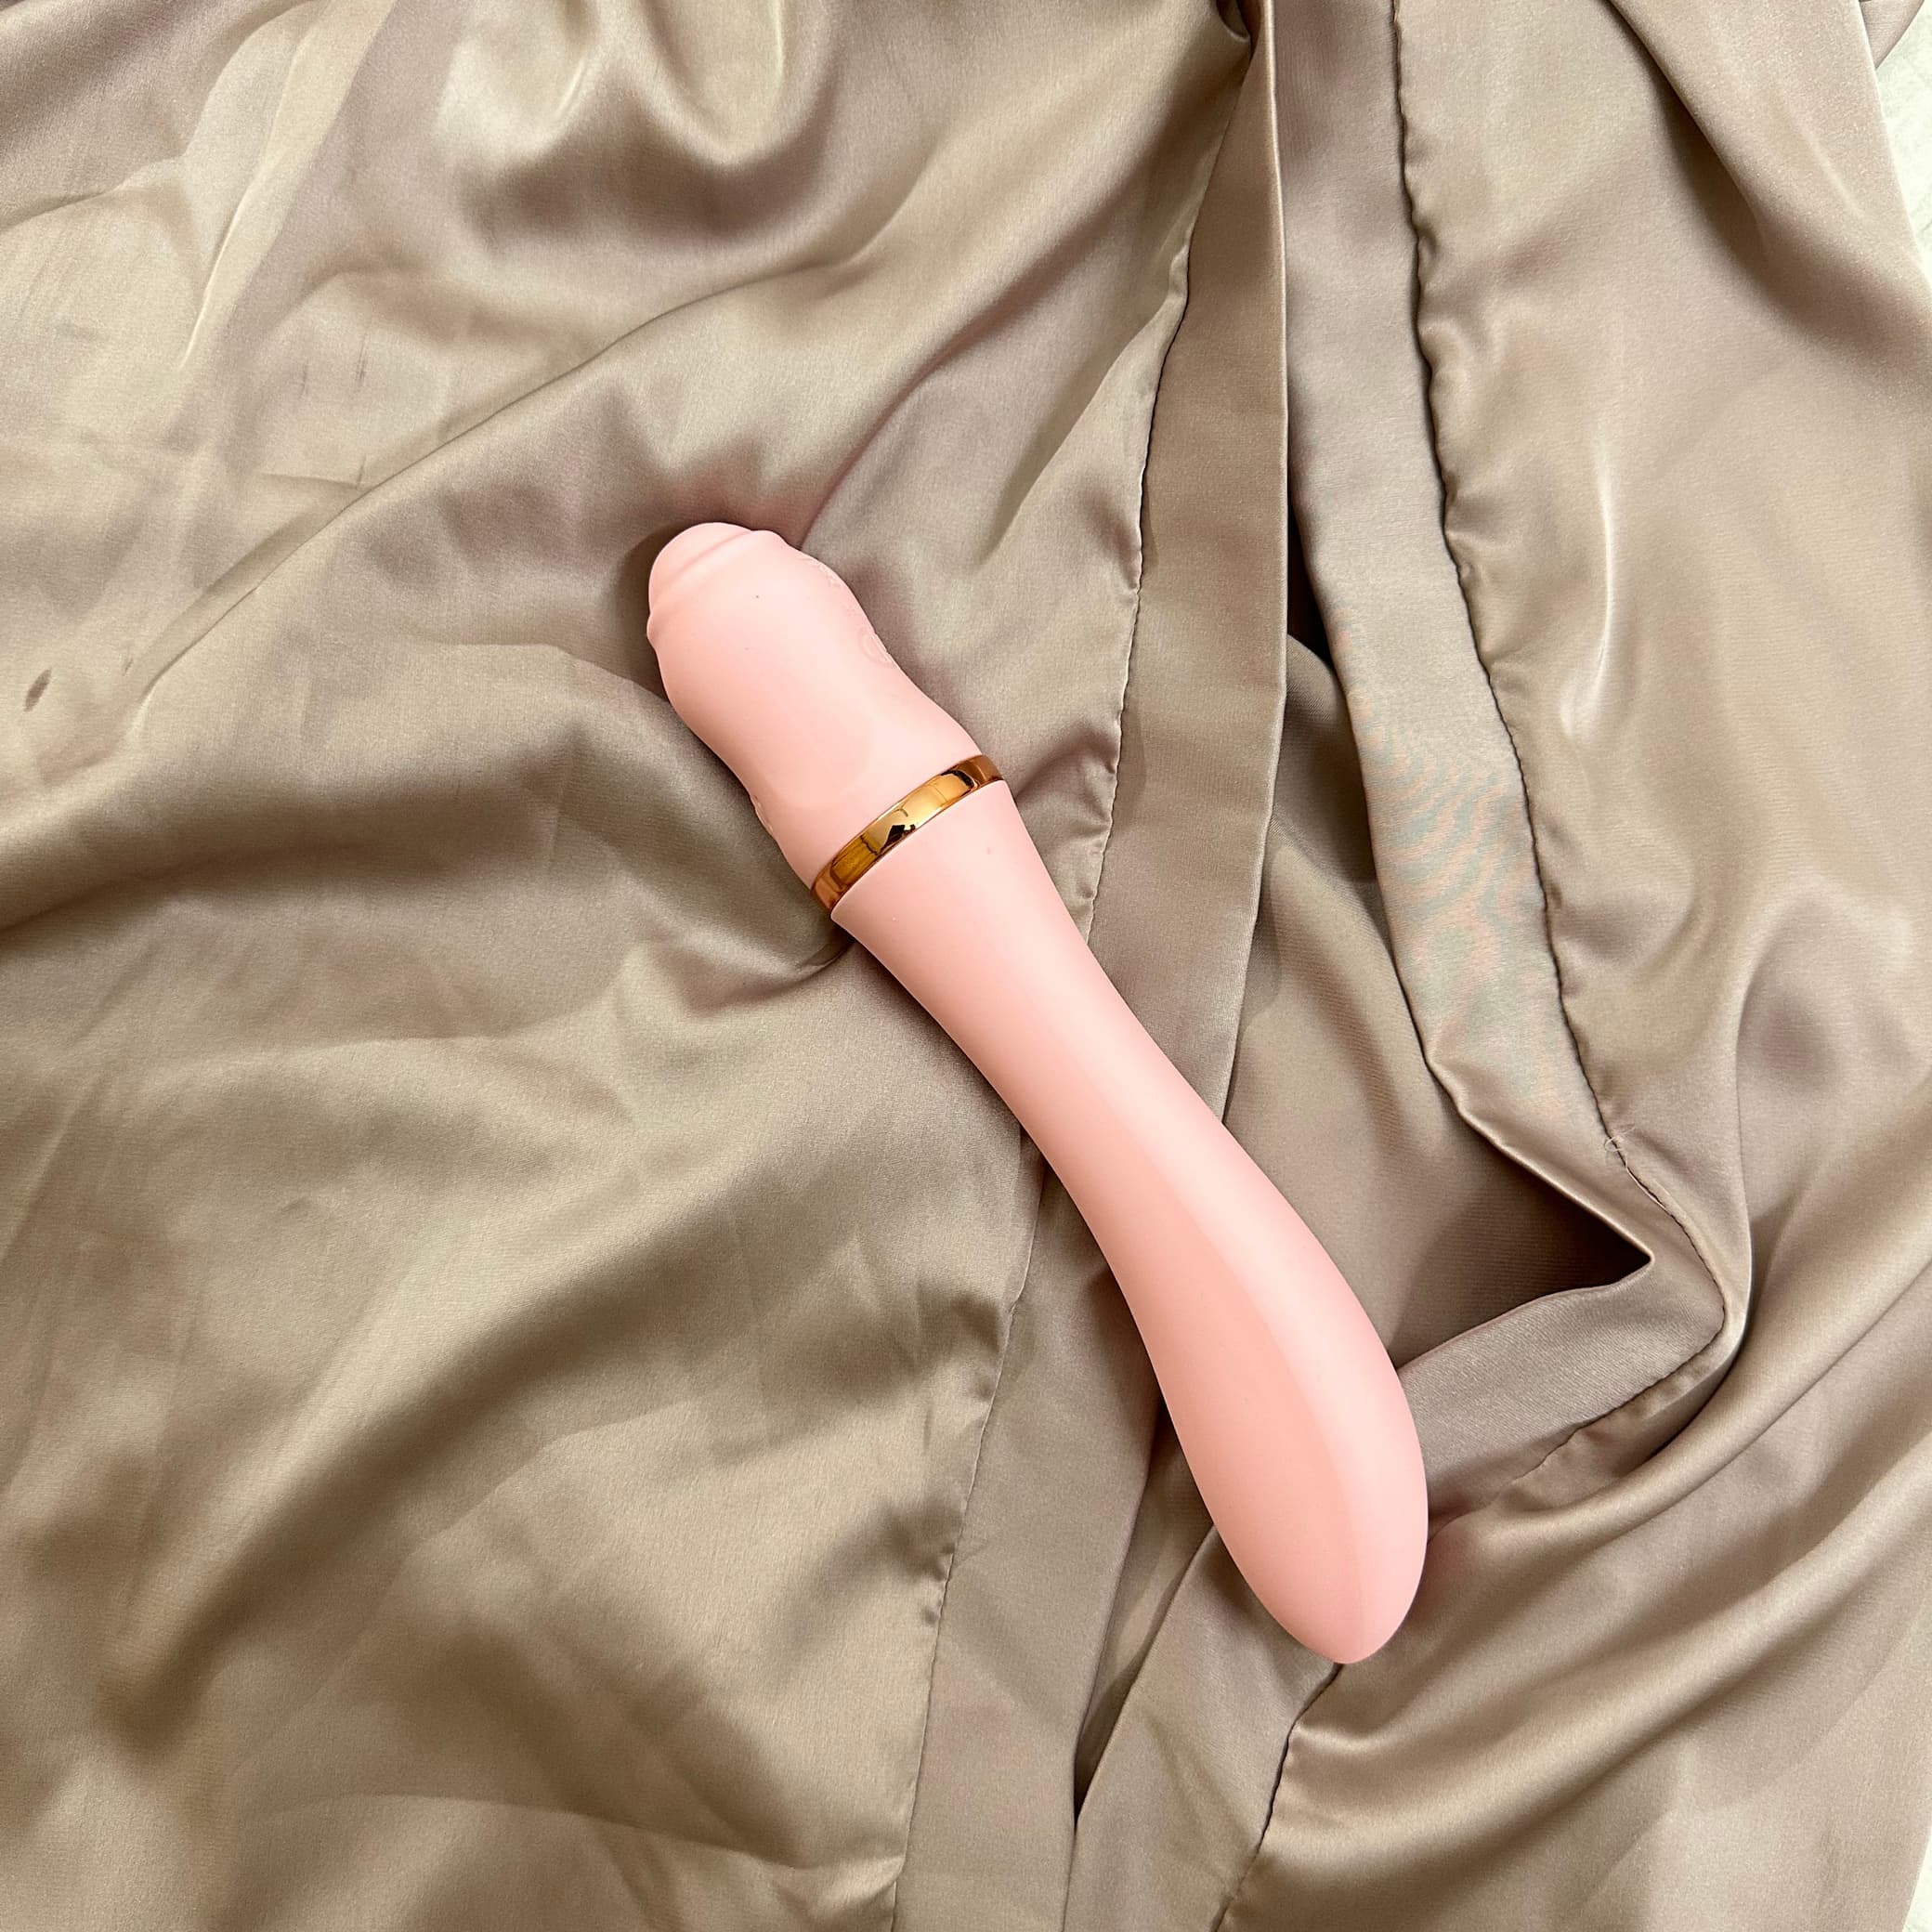 libertee-euporie-full-body-electric-massager-7-modes-and-variations-waterproof-rechargeable-flexible-rose